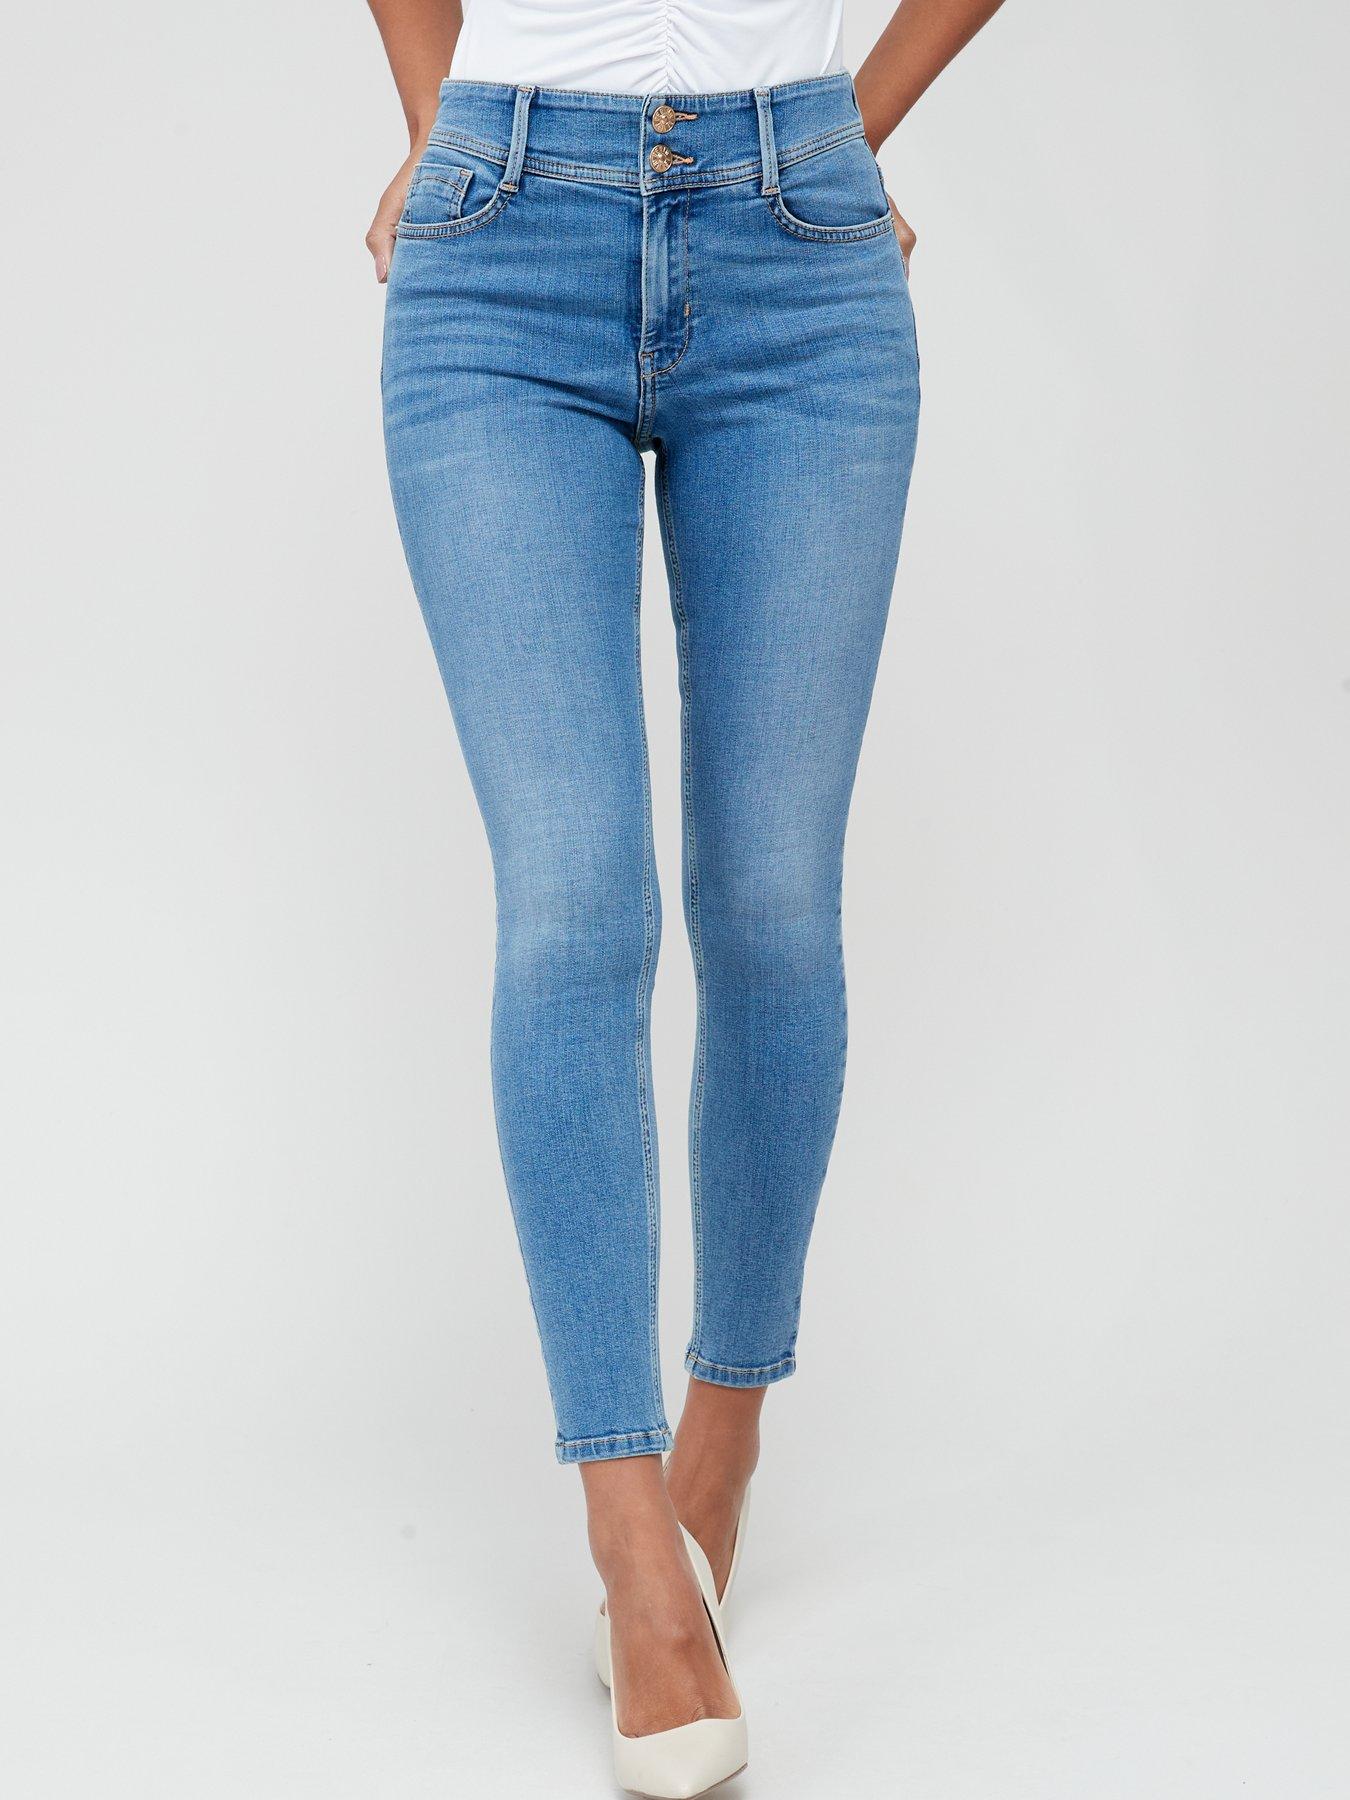 V by Very Shaping Skinny Jean - Mid Wash